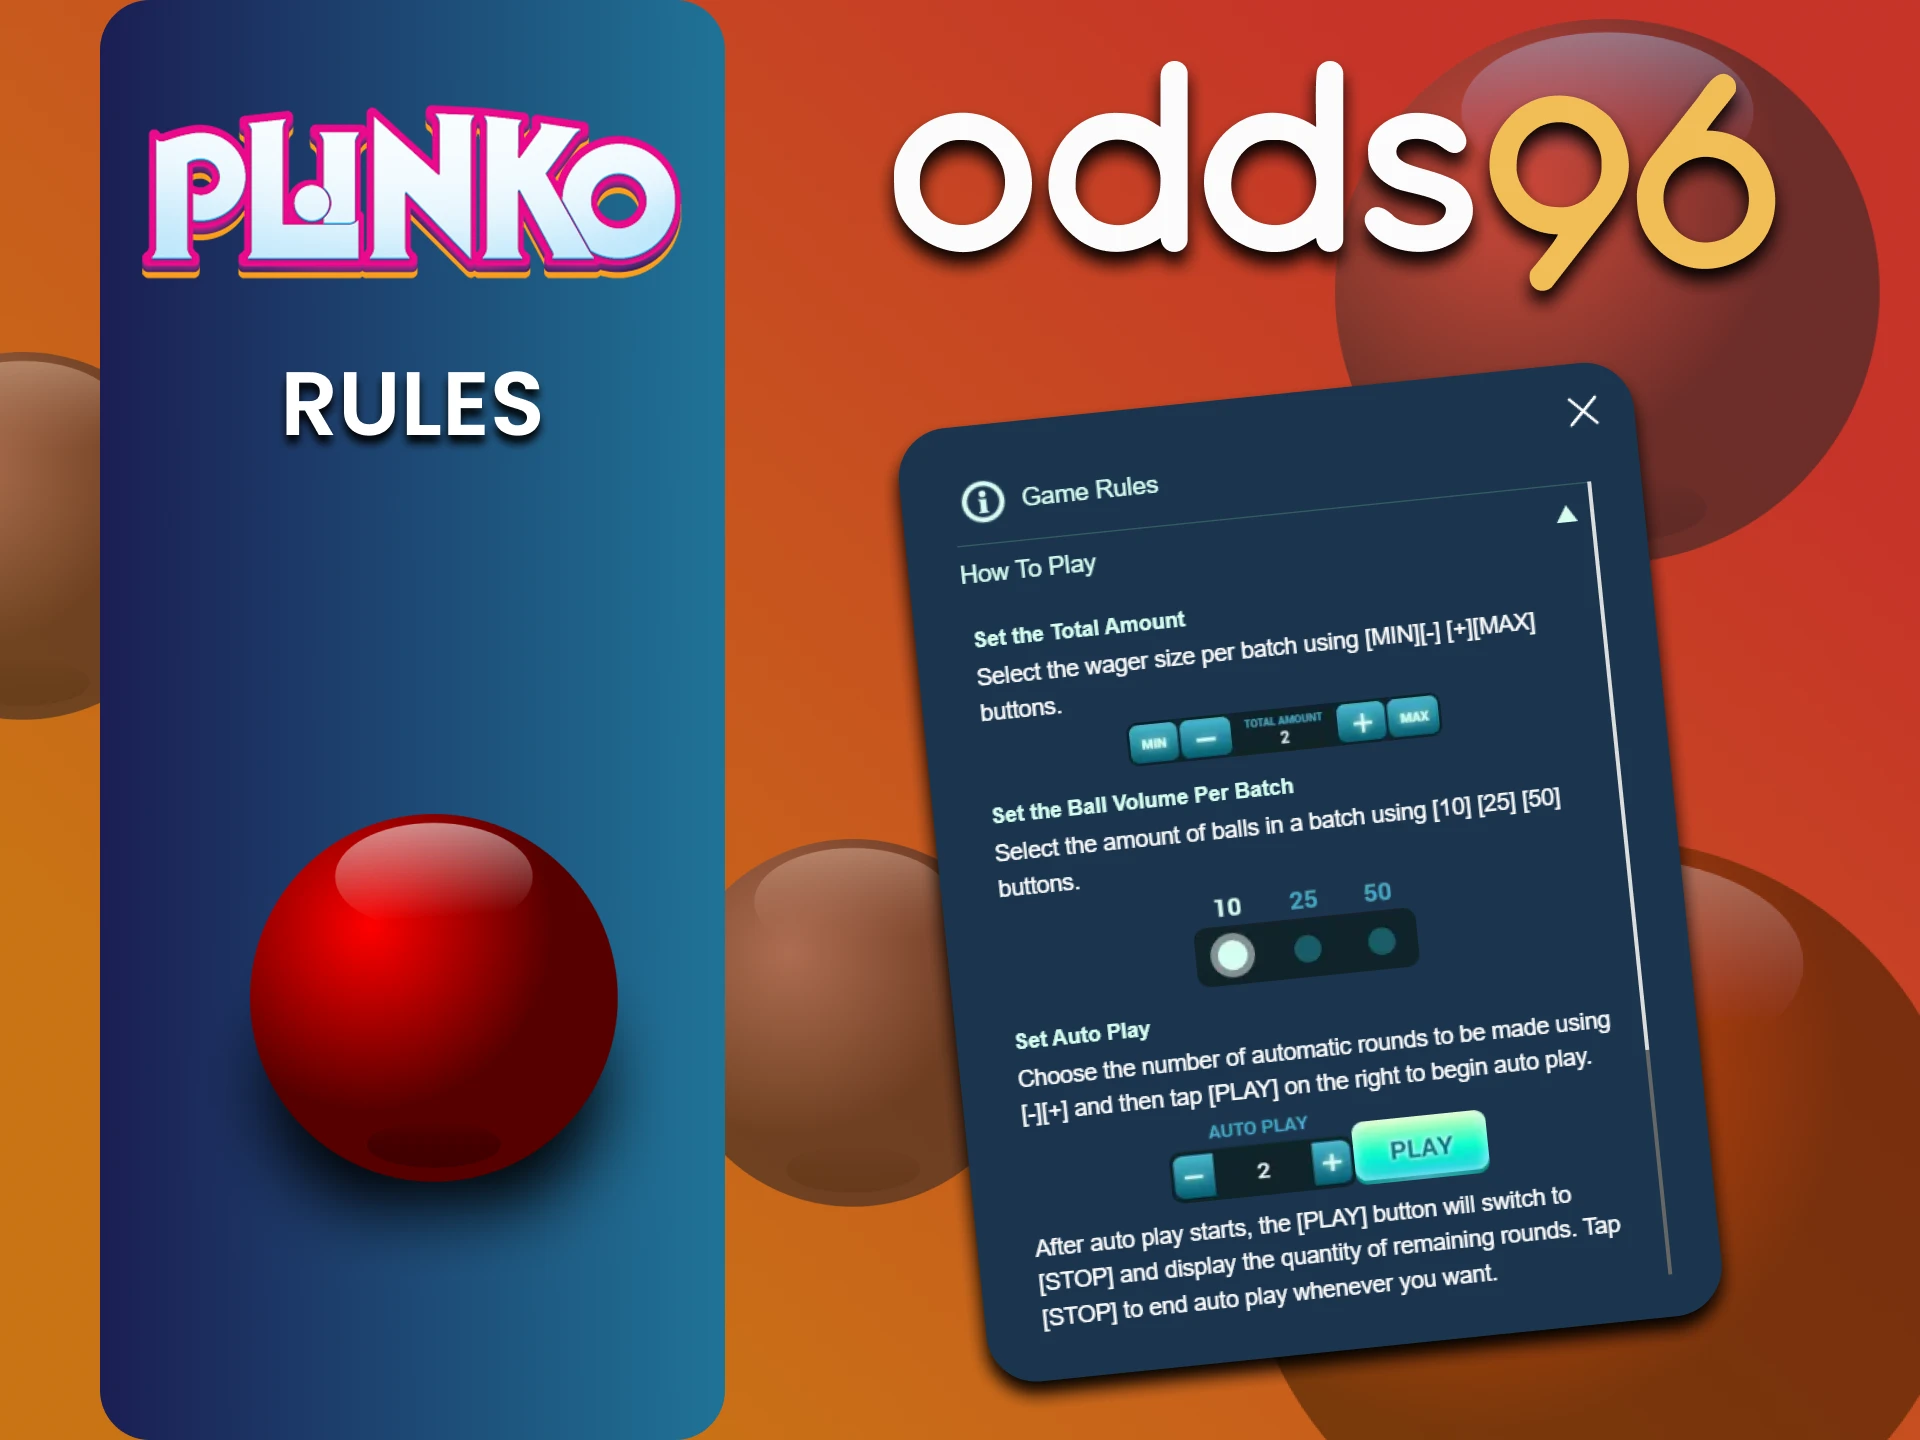 Learn the rules of playing Plinko on odds96.